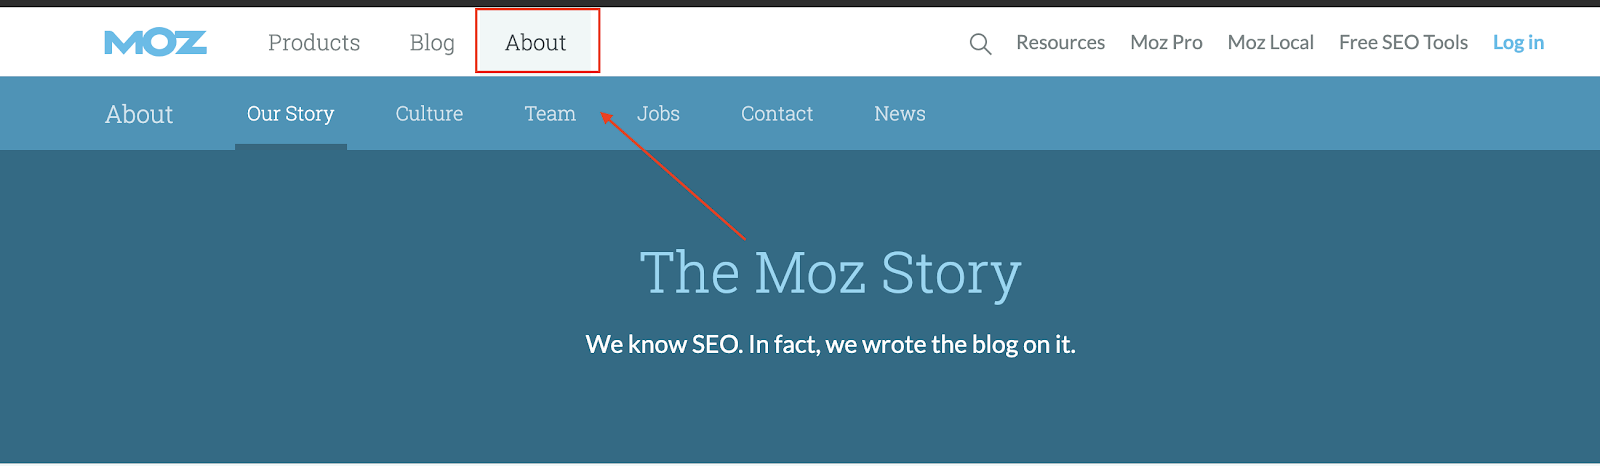 Moz about page